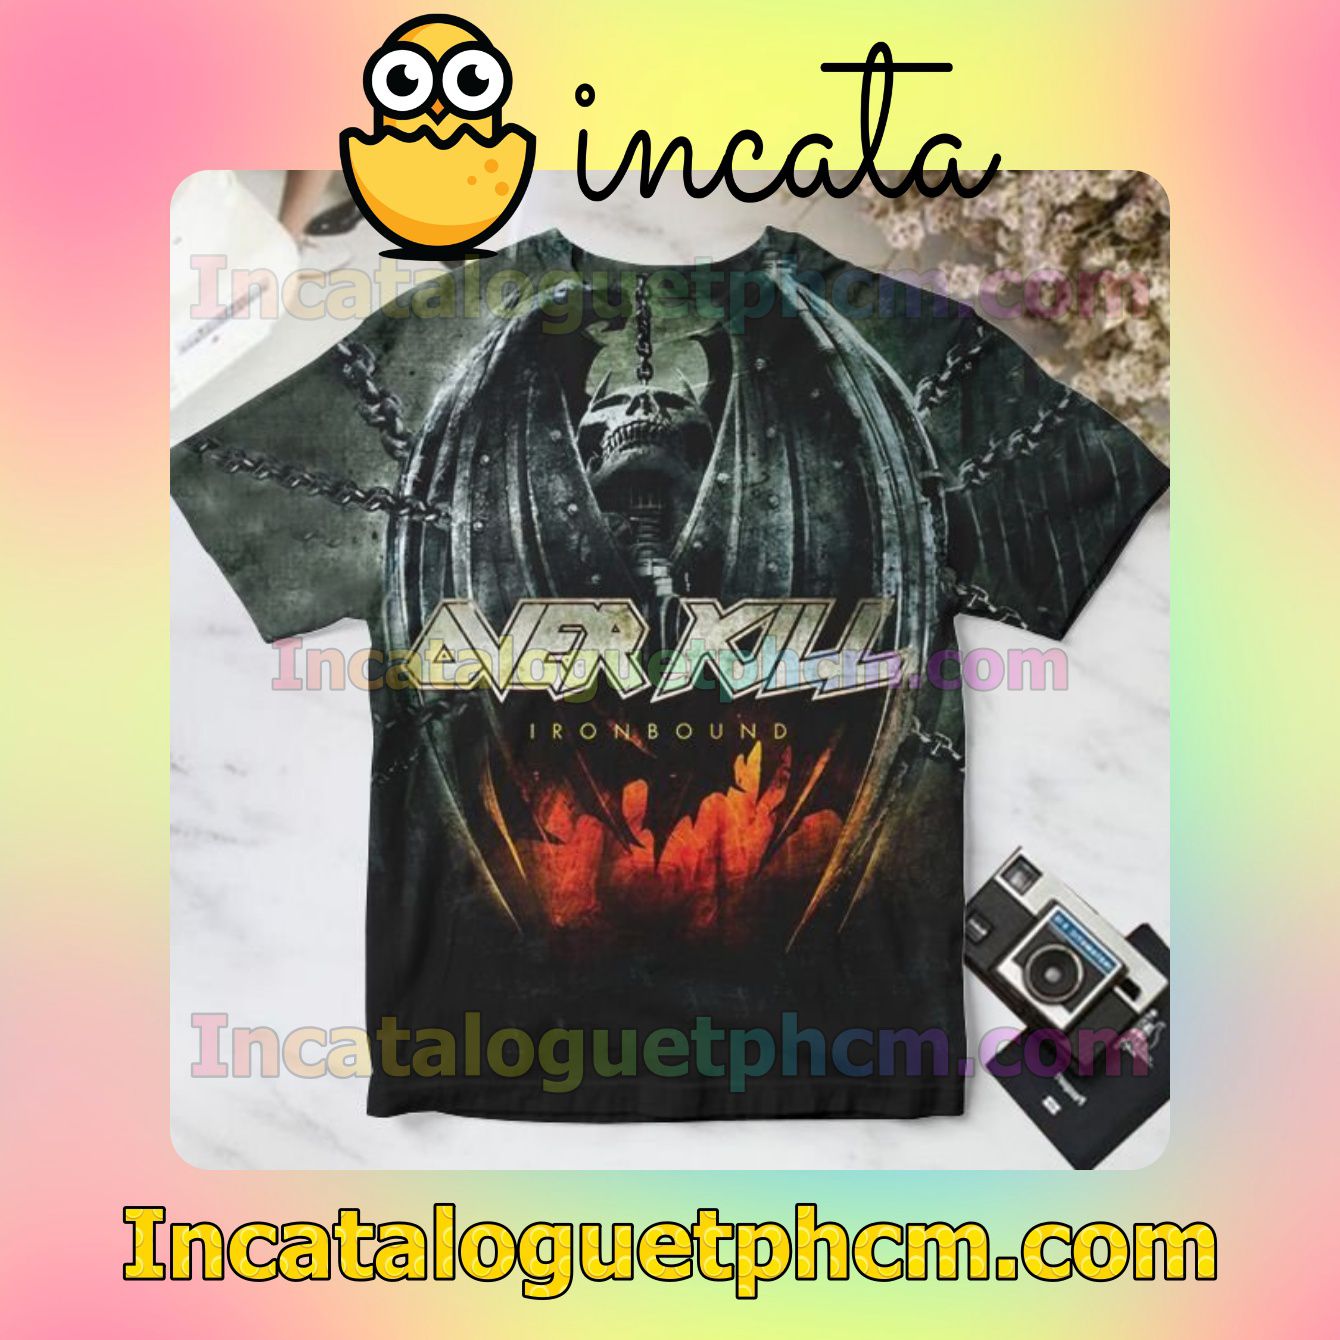 Overkill Ironbound Album Cover For Fan Personalized T-Shirt